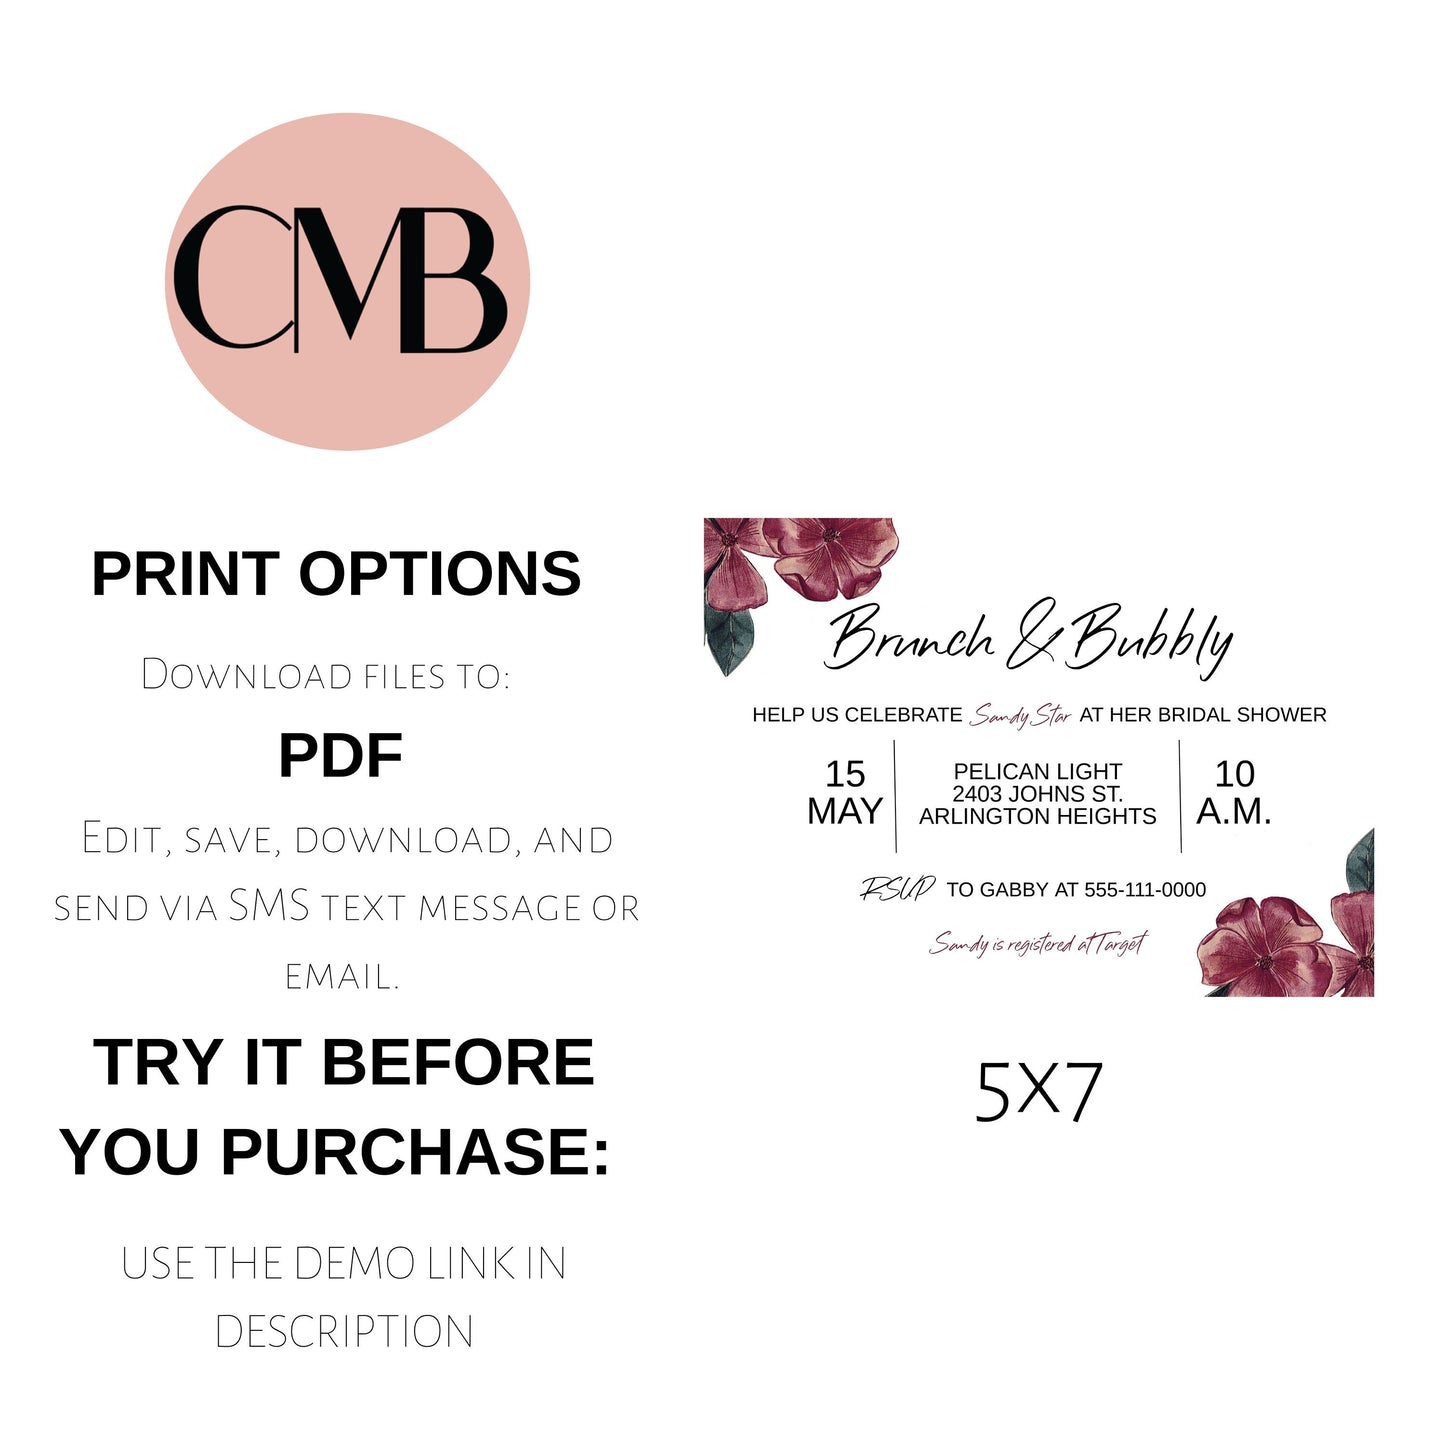 Bridal Shower Invite | Brunch and Bubbly | Editable Instant Download